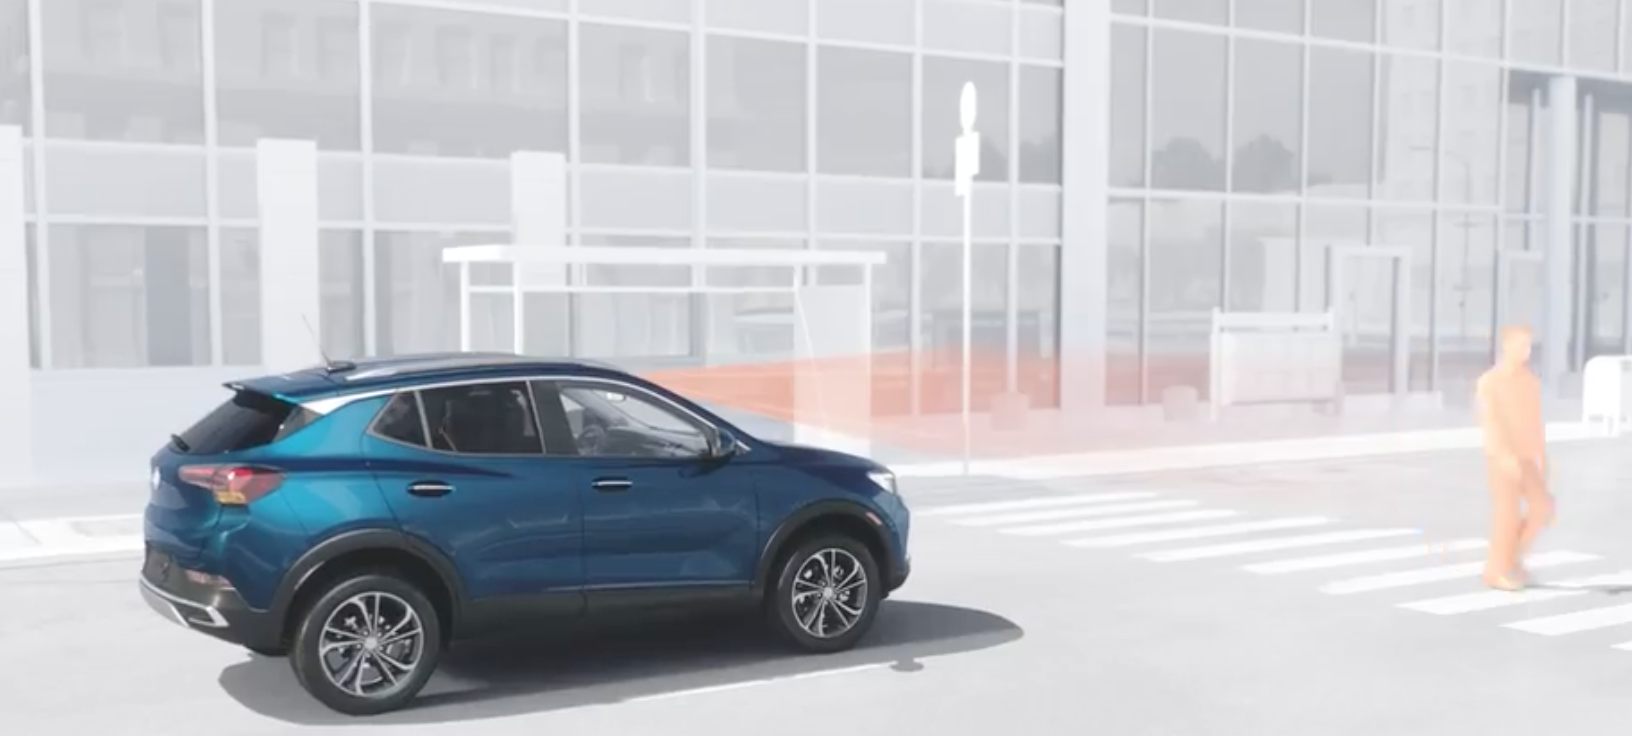 2021 Buick Encore safety